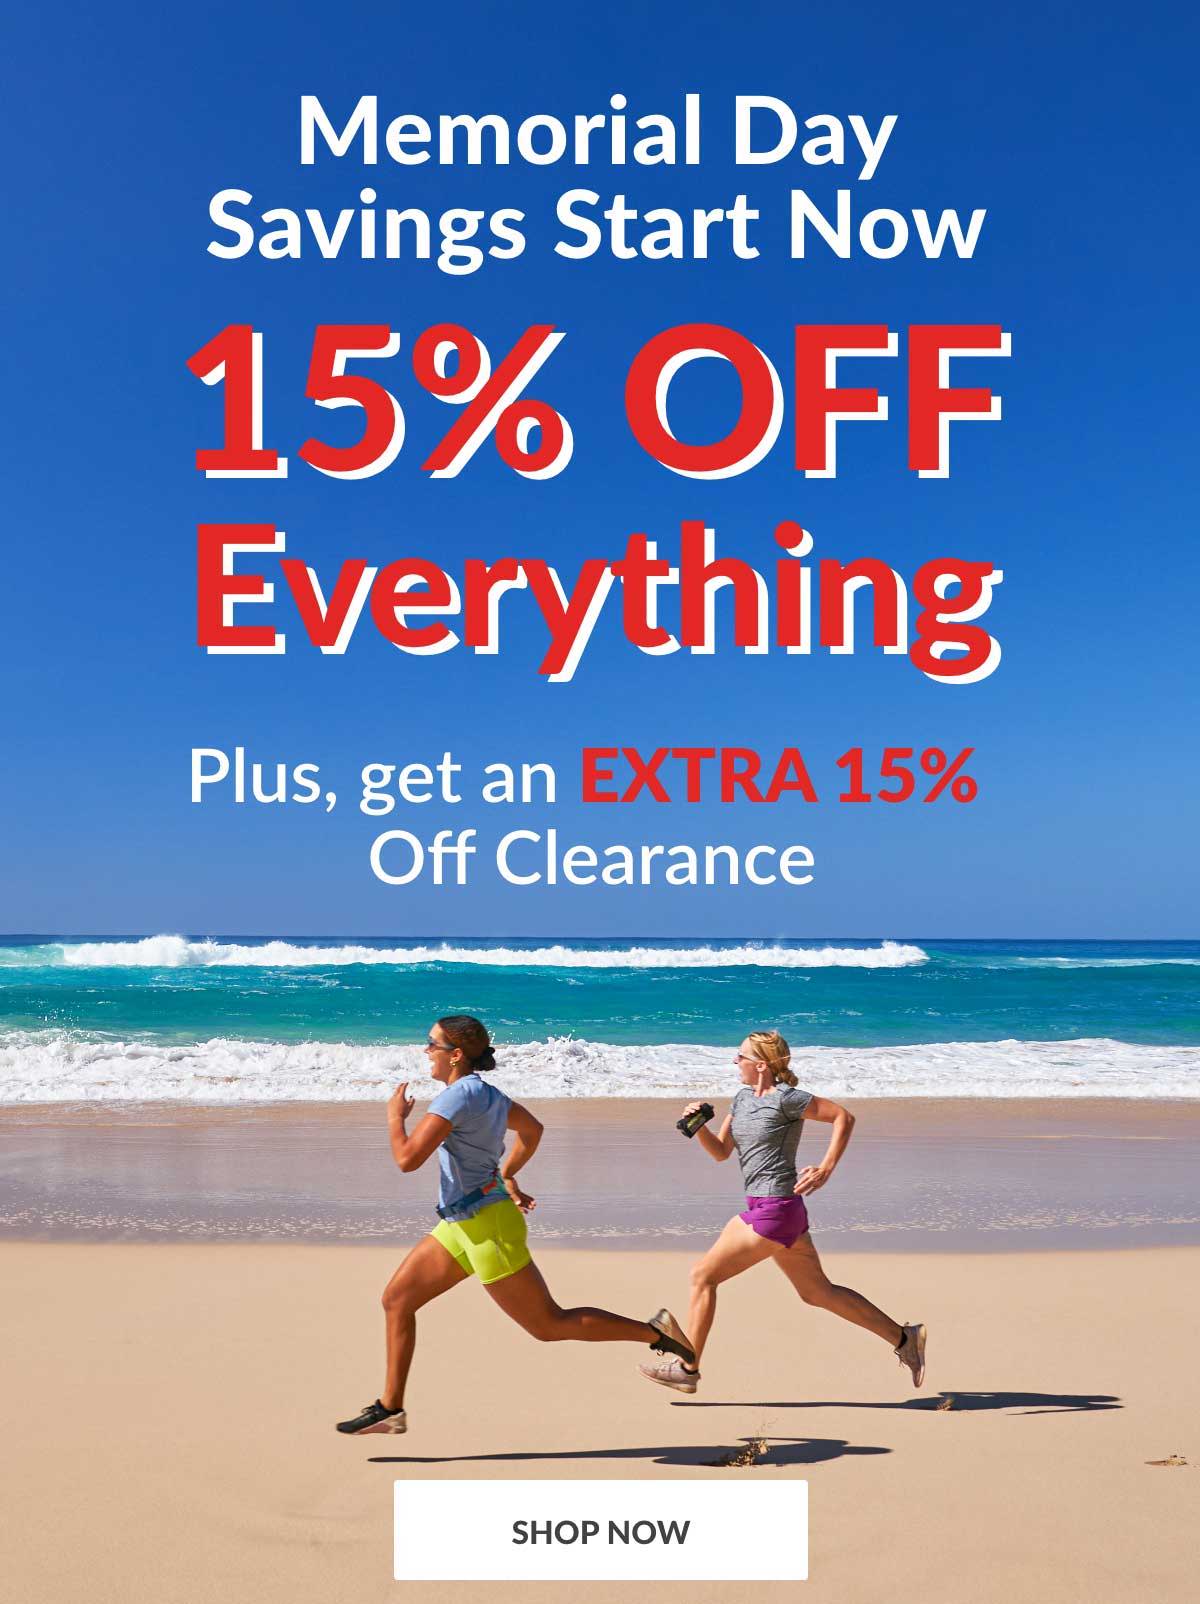 Memorial Day Savings Start Now - 15% OFF Everything - Plus, get an EXTRA 15% OFF Clearance  - SHOP NOW